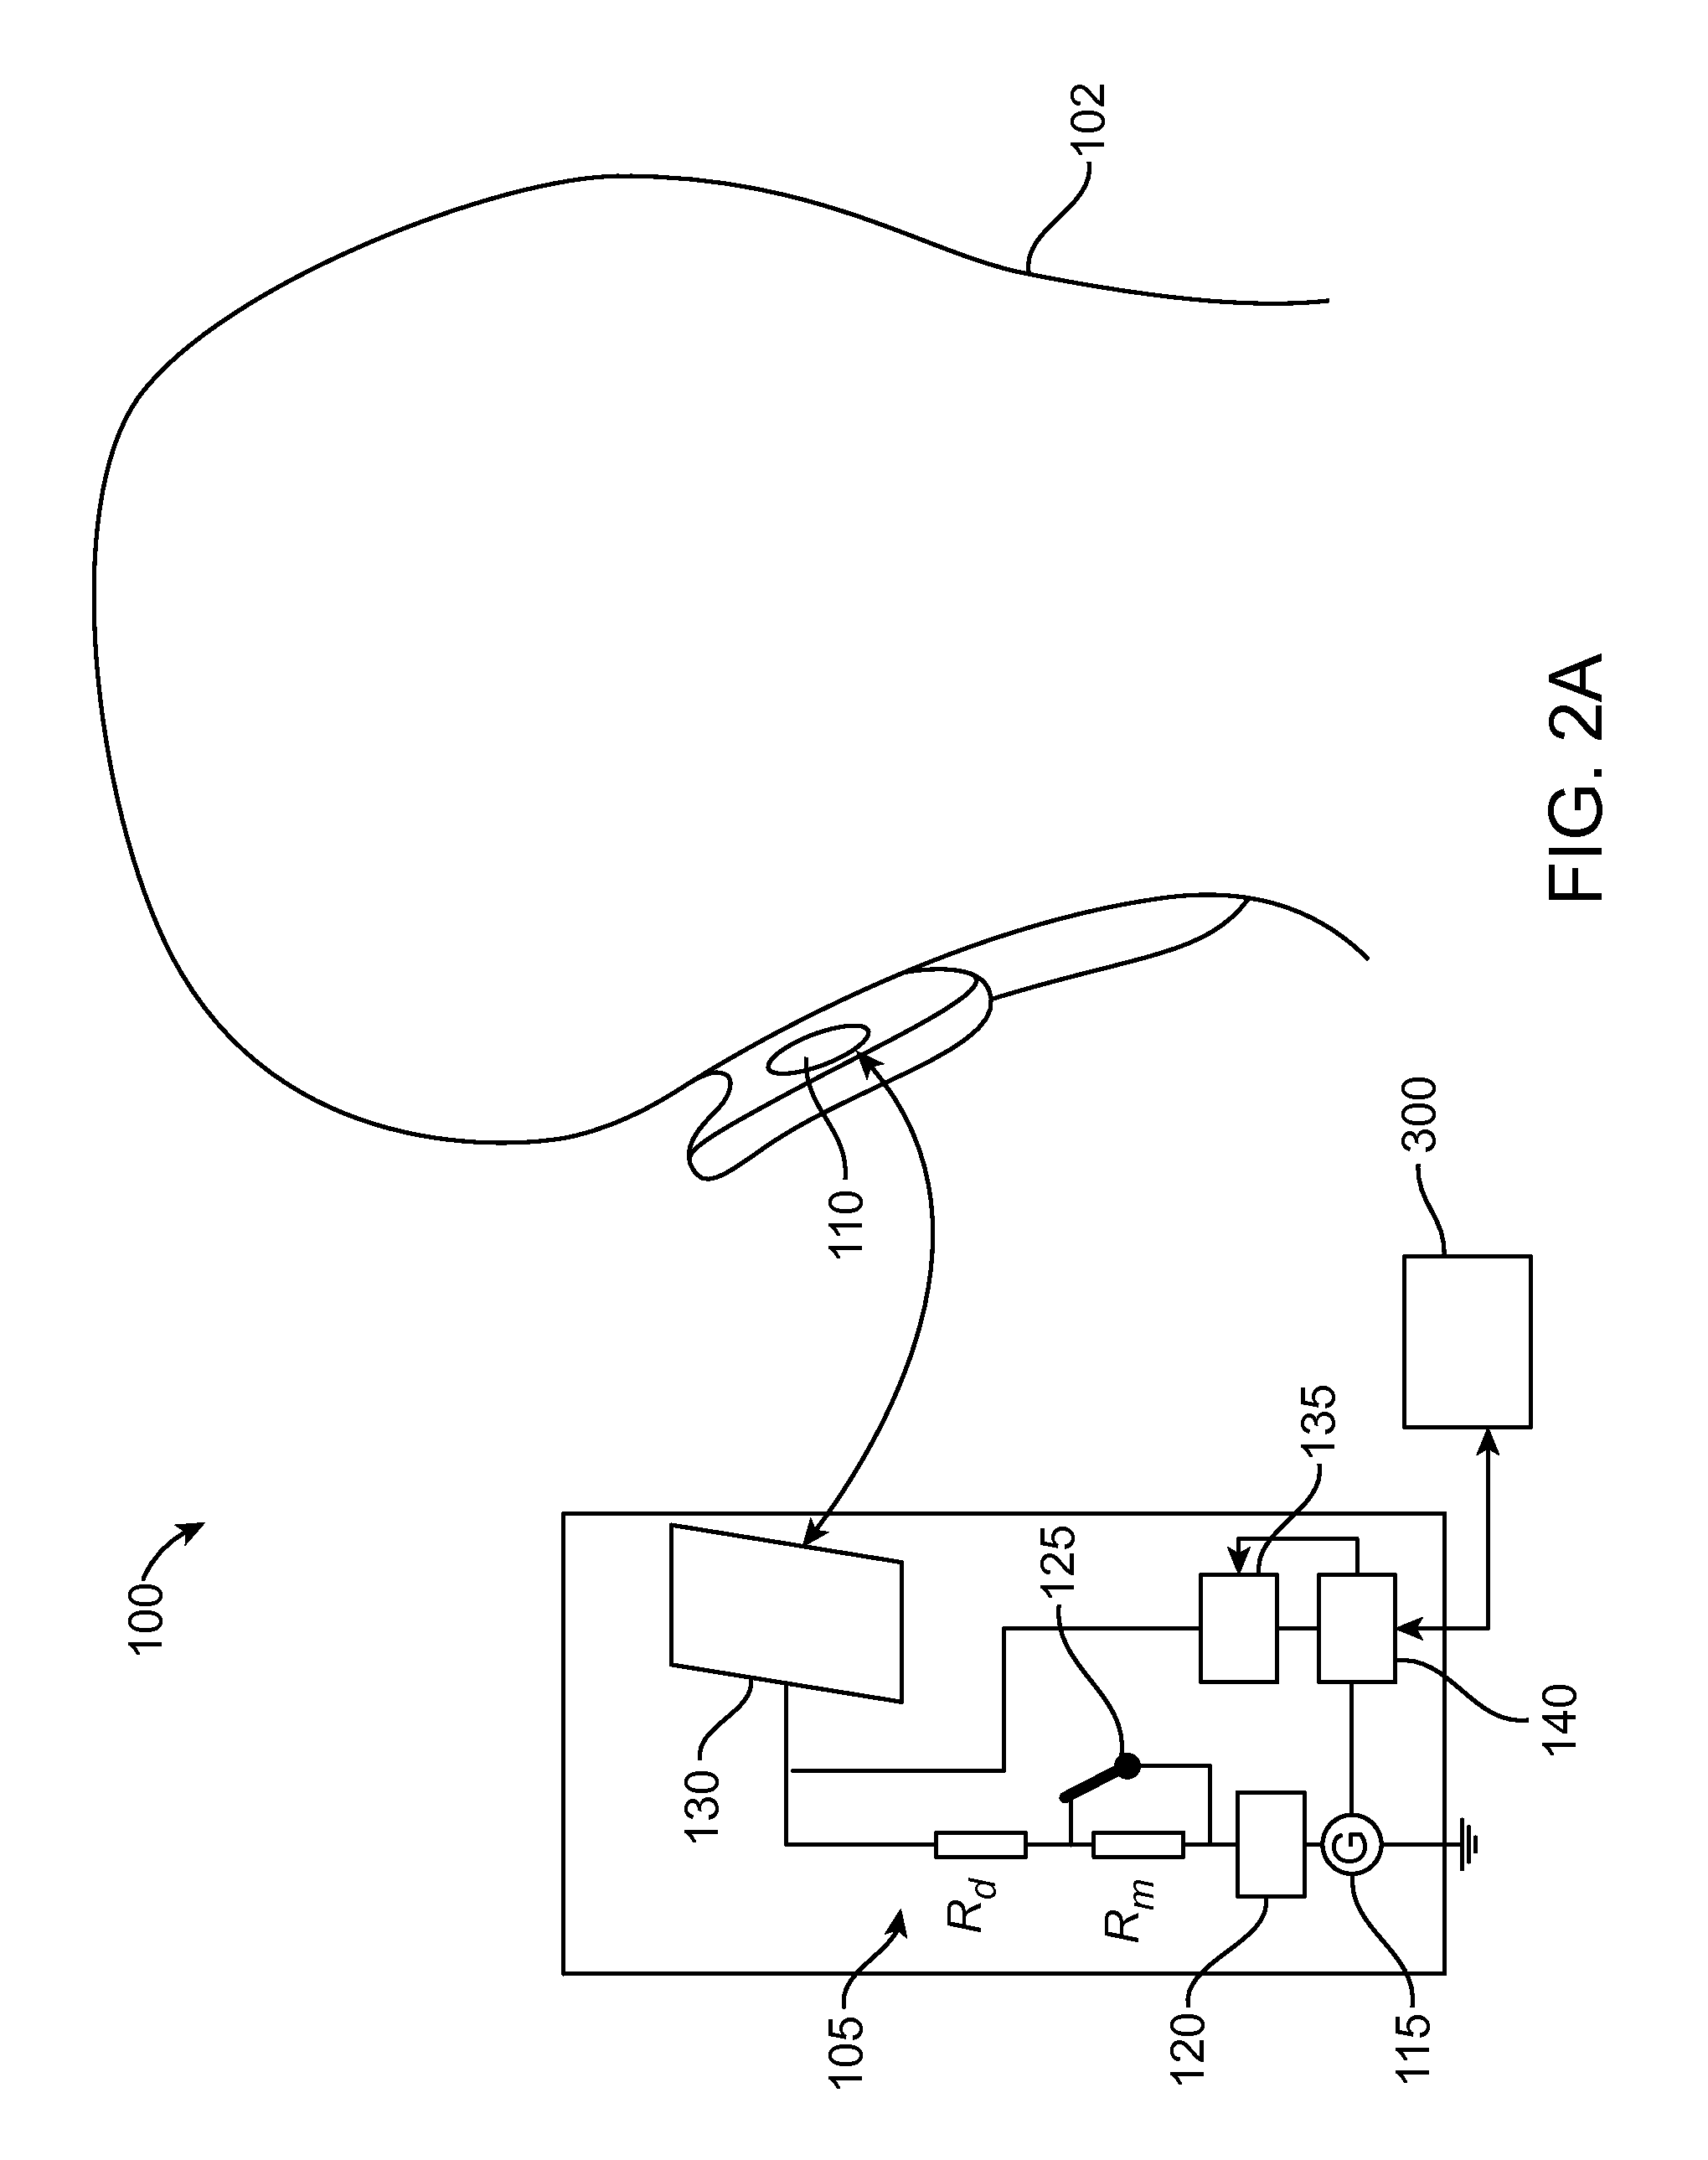 System and a method for communicating user interaction data to one or more communication devices